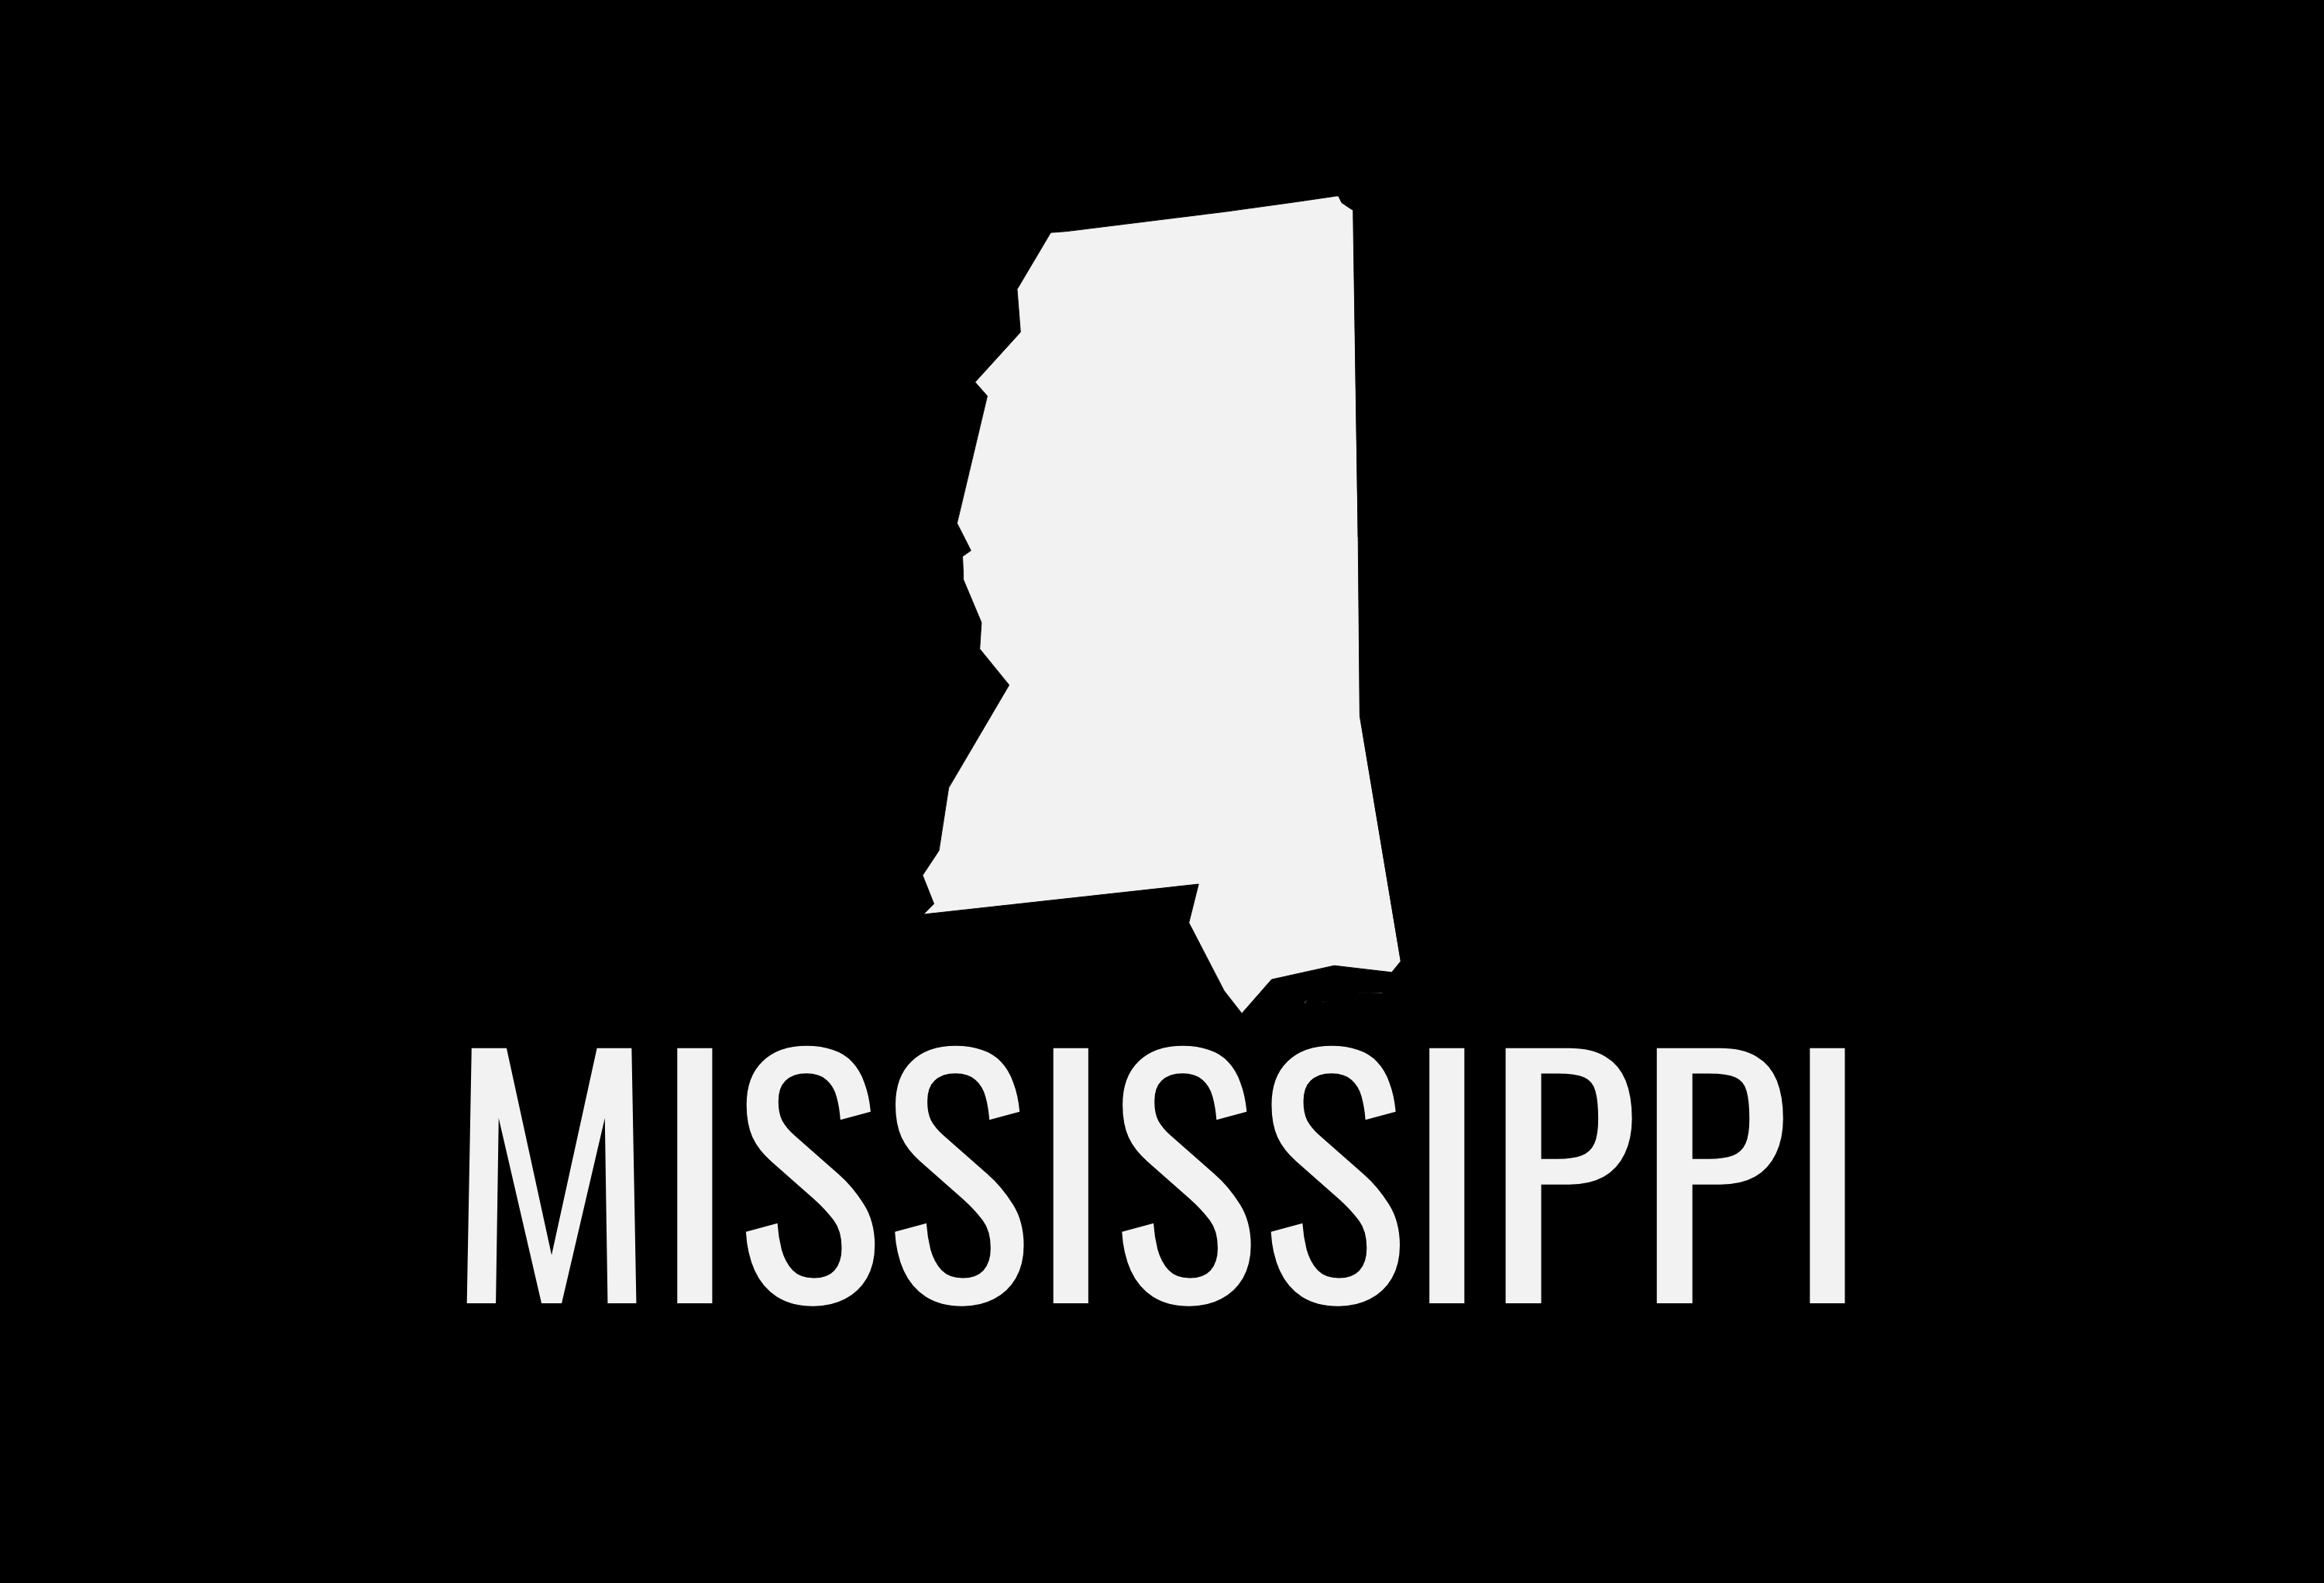 Mississippi State Map Car Decal - Permanent Vinyl Sticker for Cars, Vehicle, Doors, Windows, Laptop, and more!